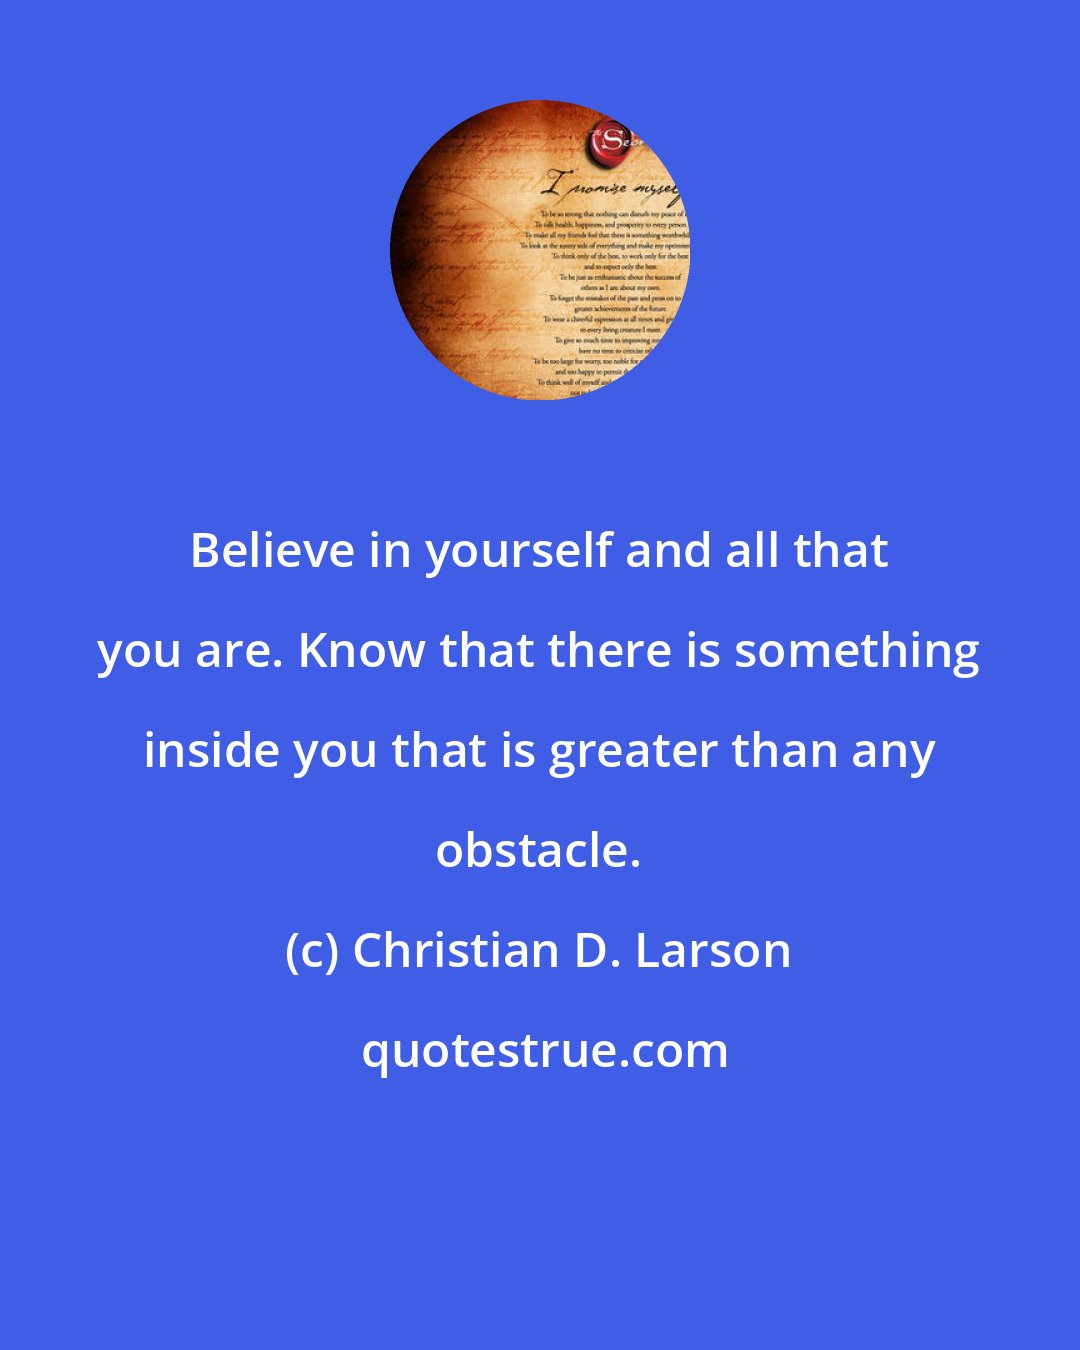 Christian D. Larson: Believe in yourself and all that you are. Know that there is something inside you that is greater than any obstacle.